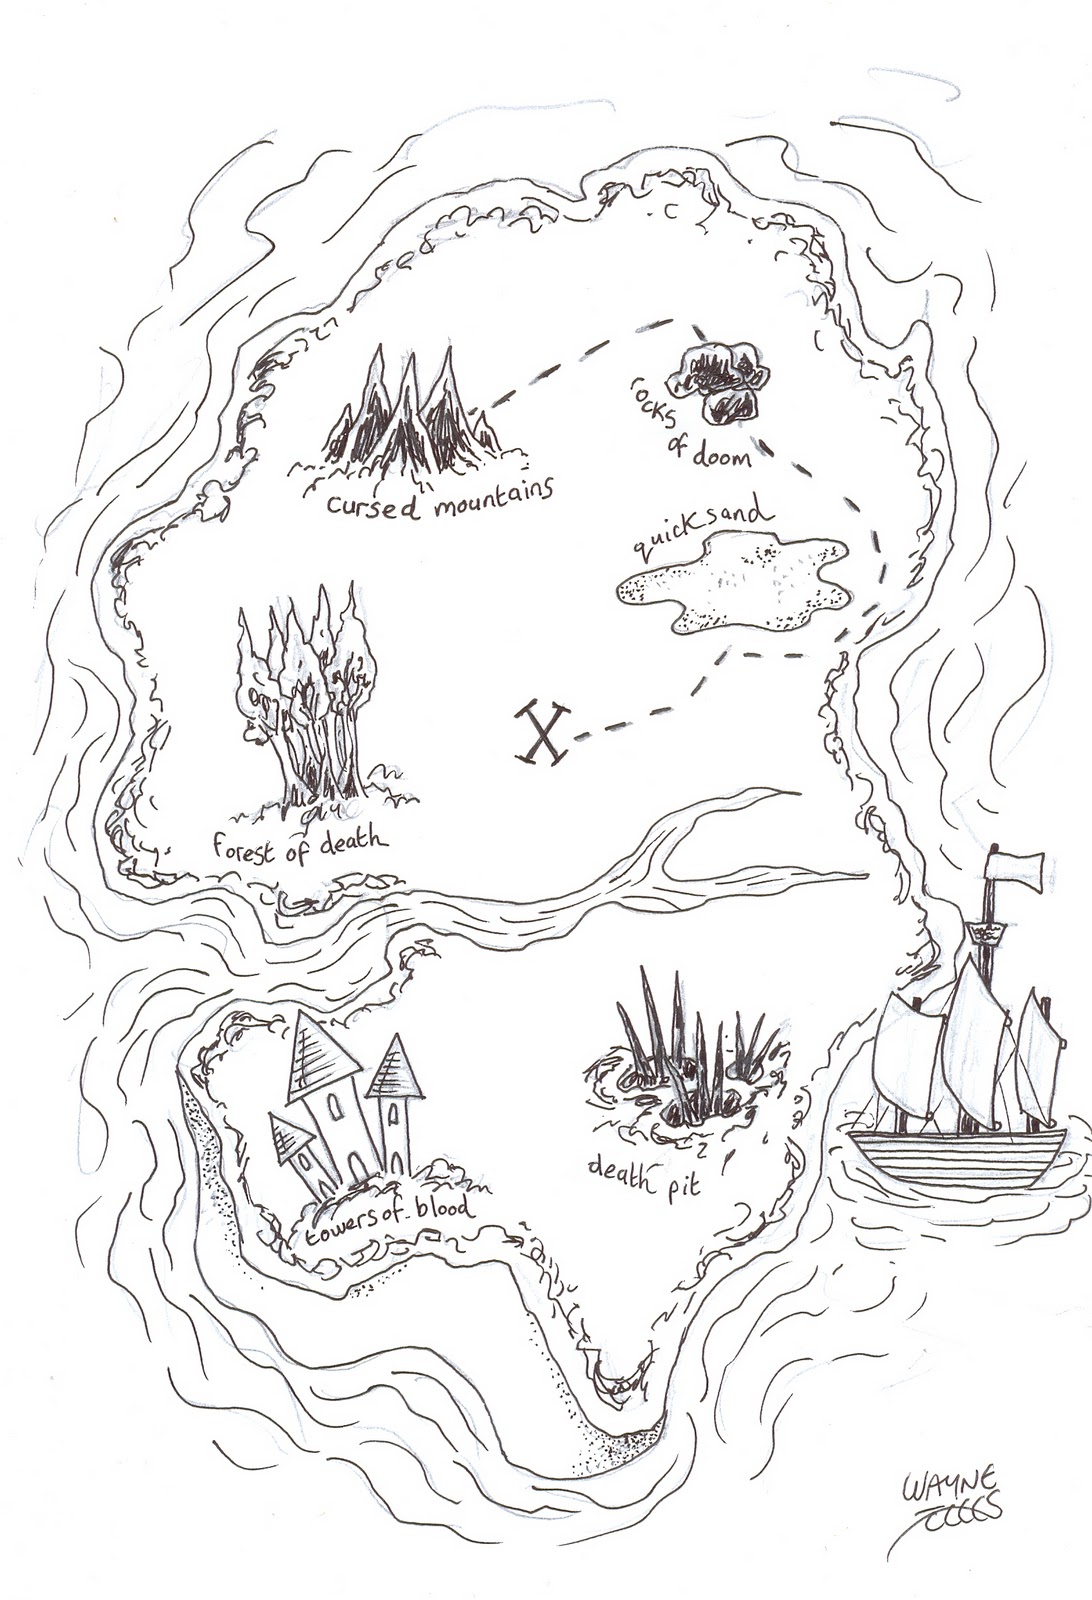 Wayne tully horror art how to draw and create a treasure map part